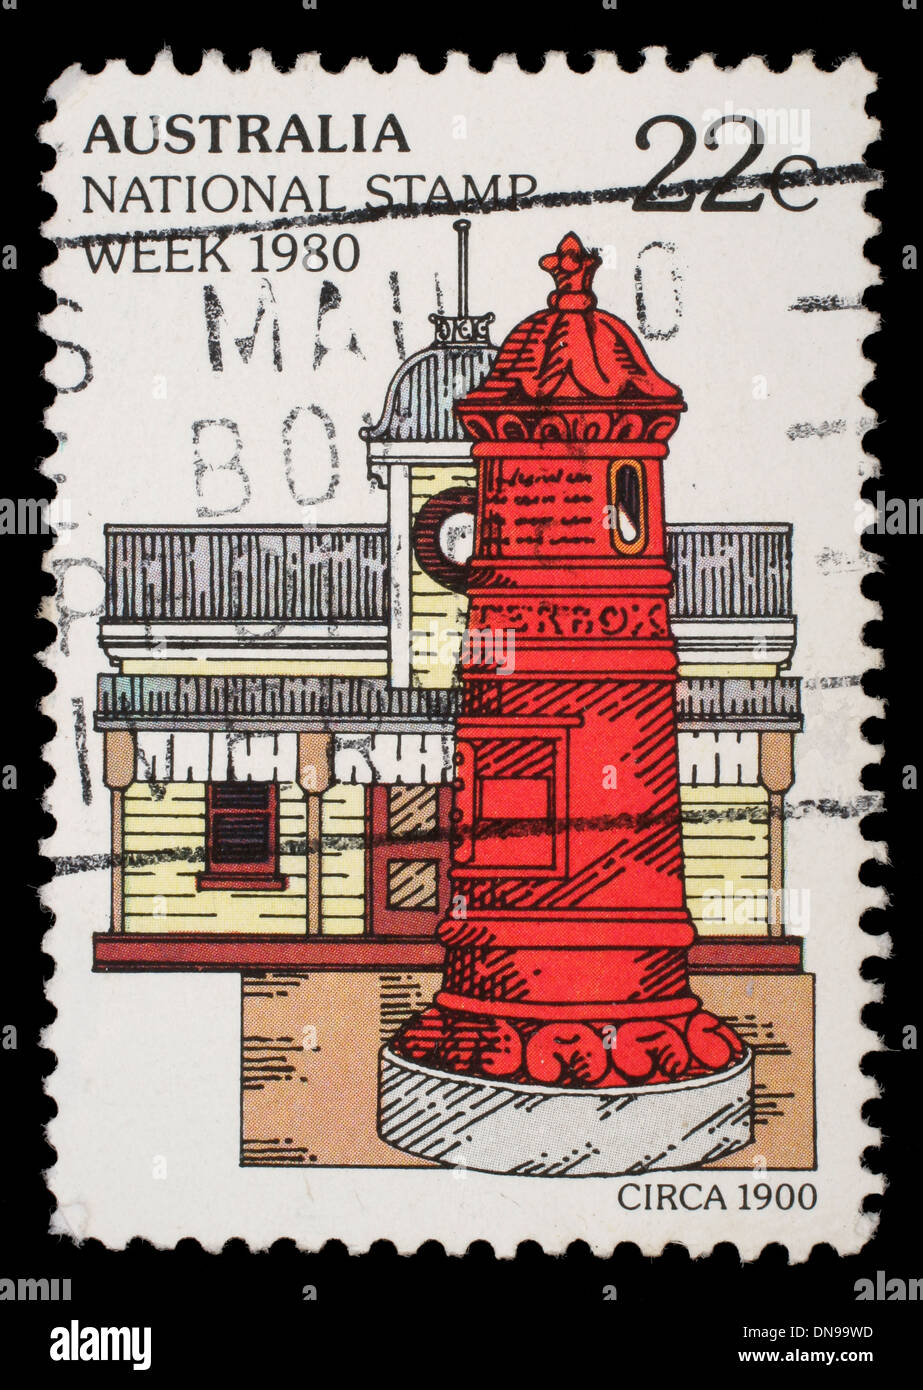 AUSTRALIA - CIRCA 1980: A stamp printed in Australia from the 'National Stamp Week' issue shows postbox, circa 1980. Stock Photo